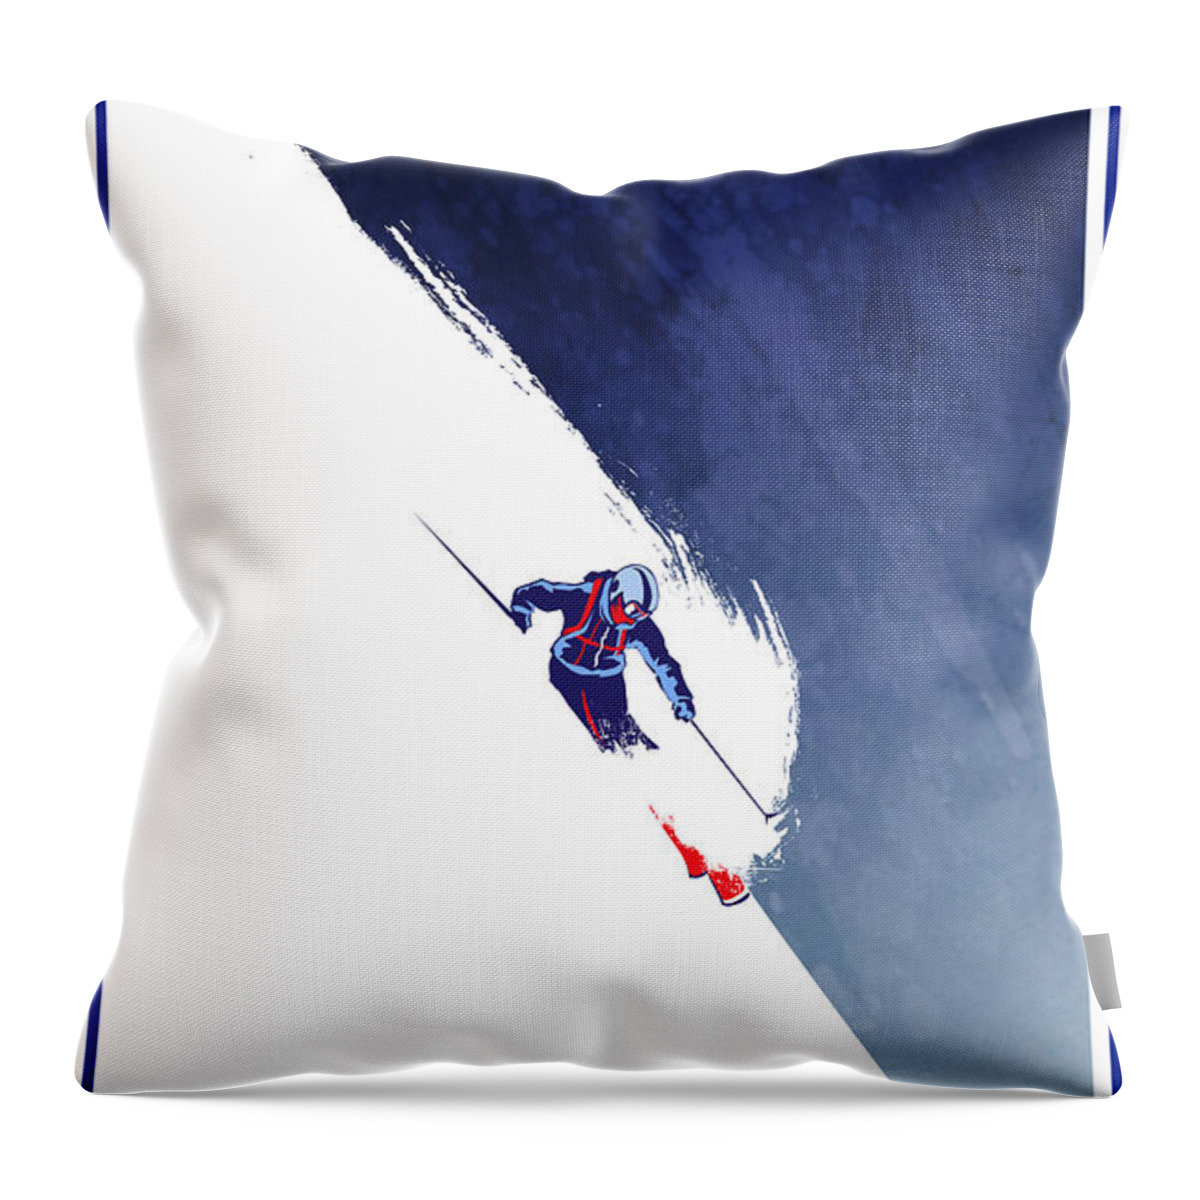 Ski Throw Pillow featuring the painting Powder to the People by Sassan Filsoof